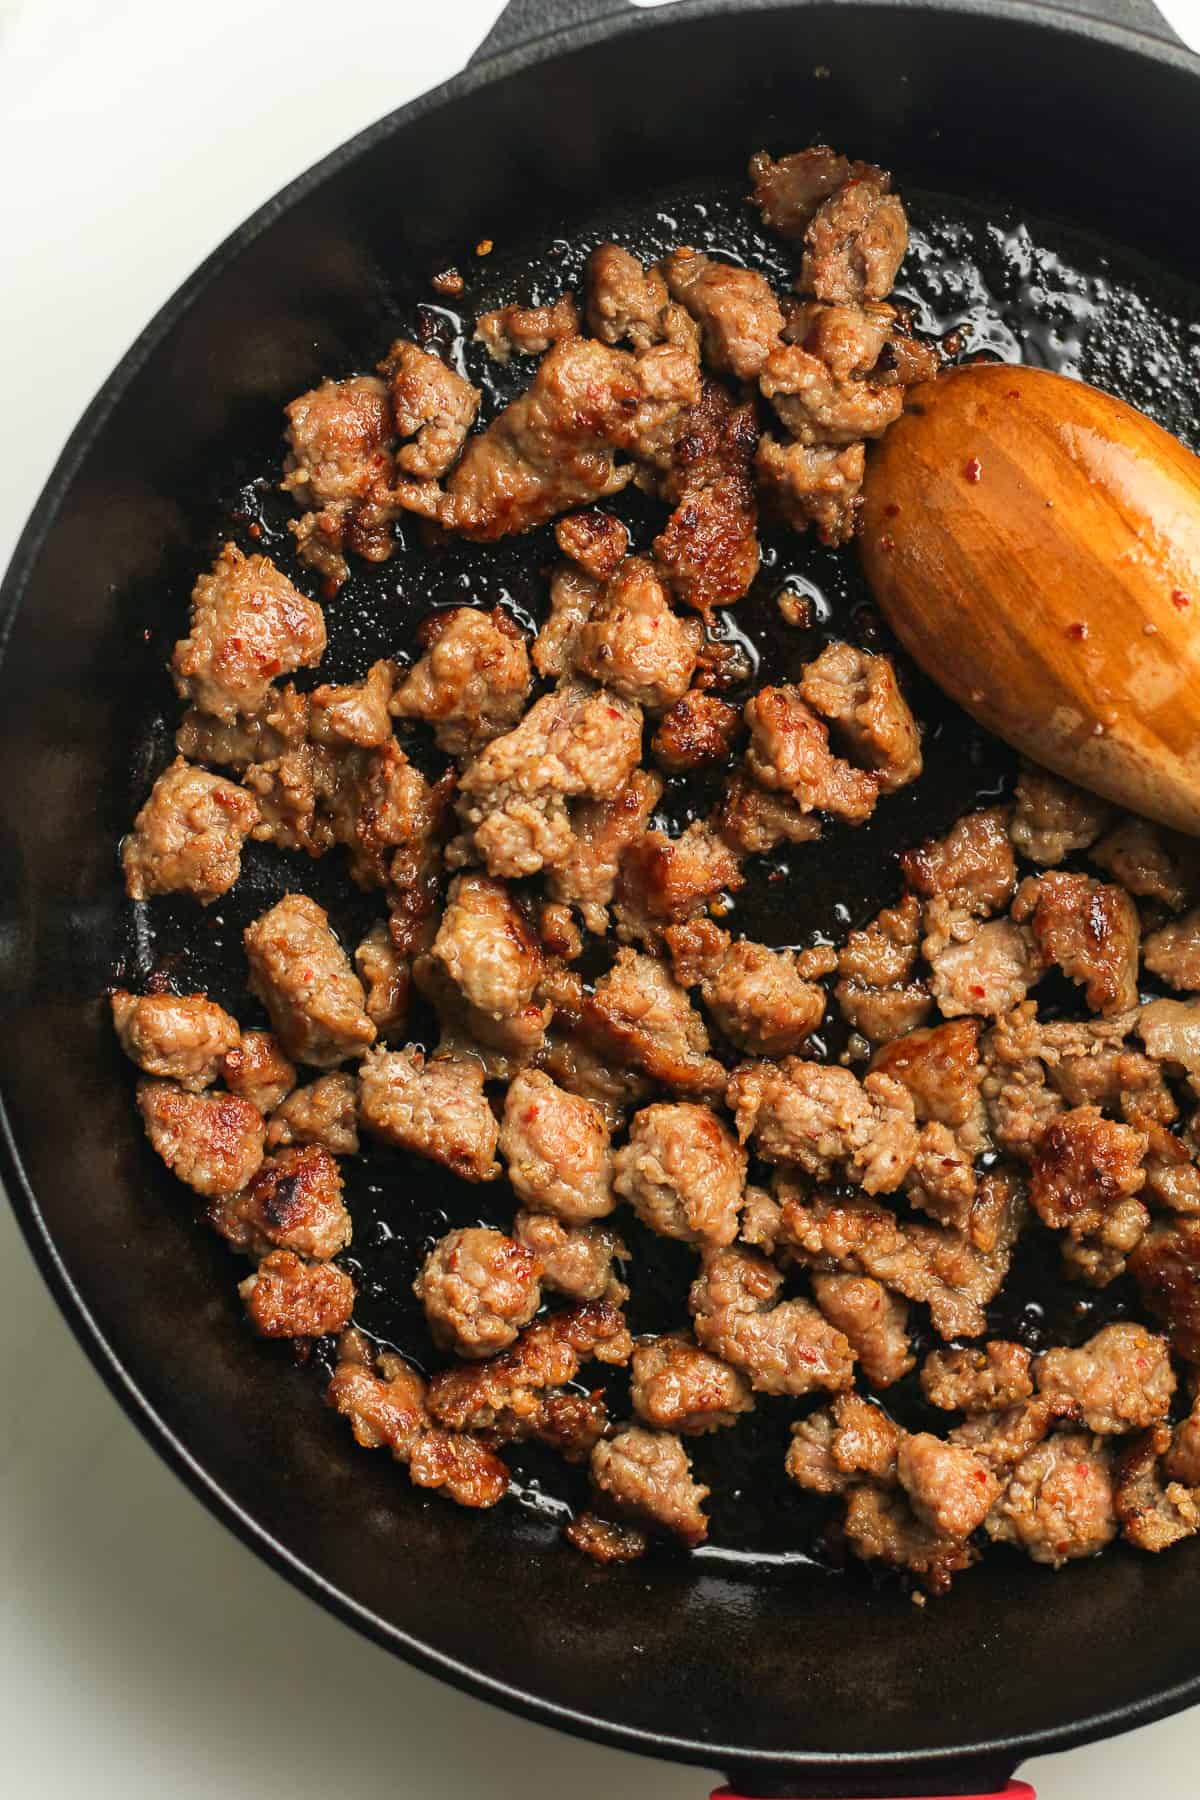 The skillet of cooked sausage with a wooden spoon.